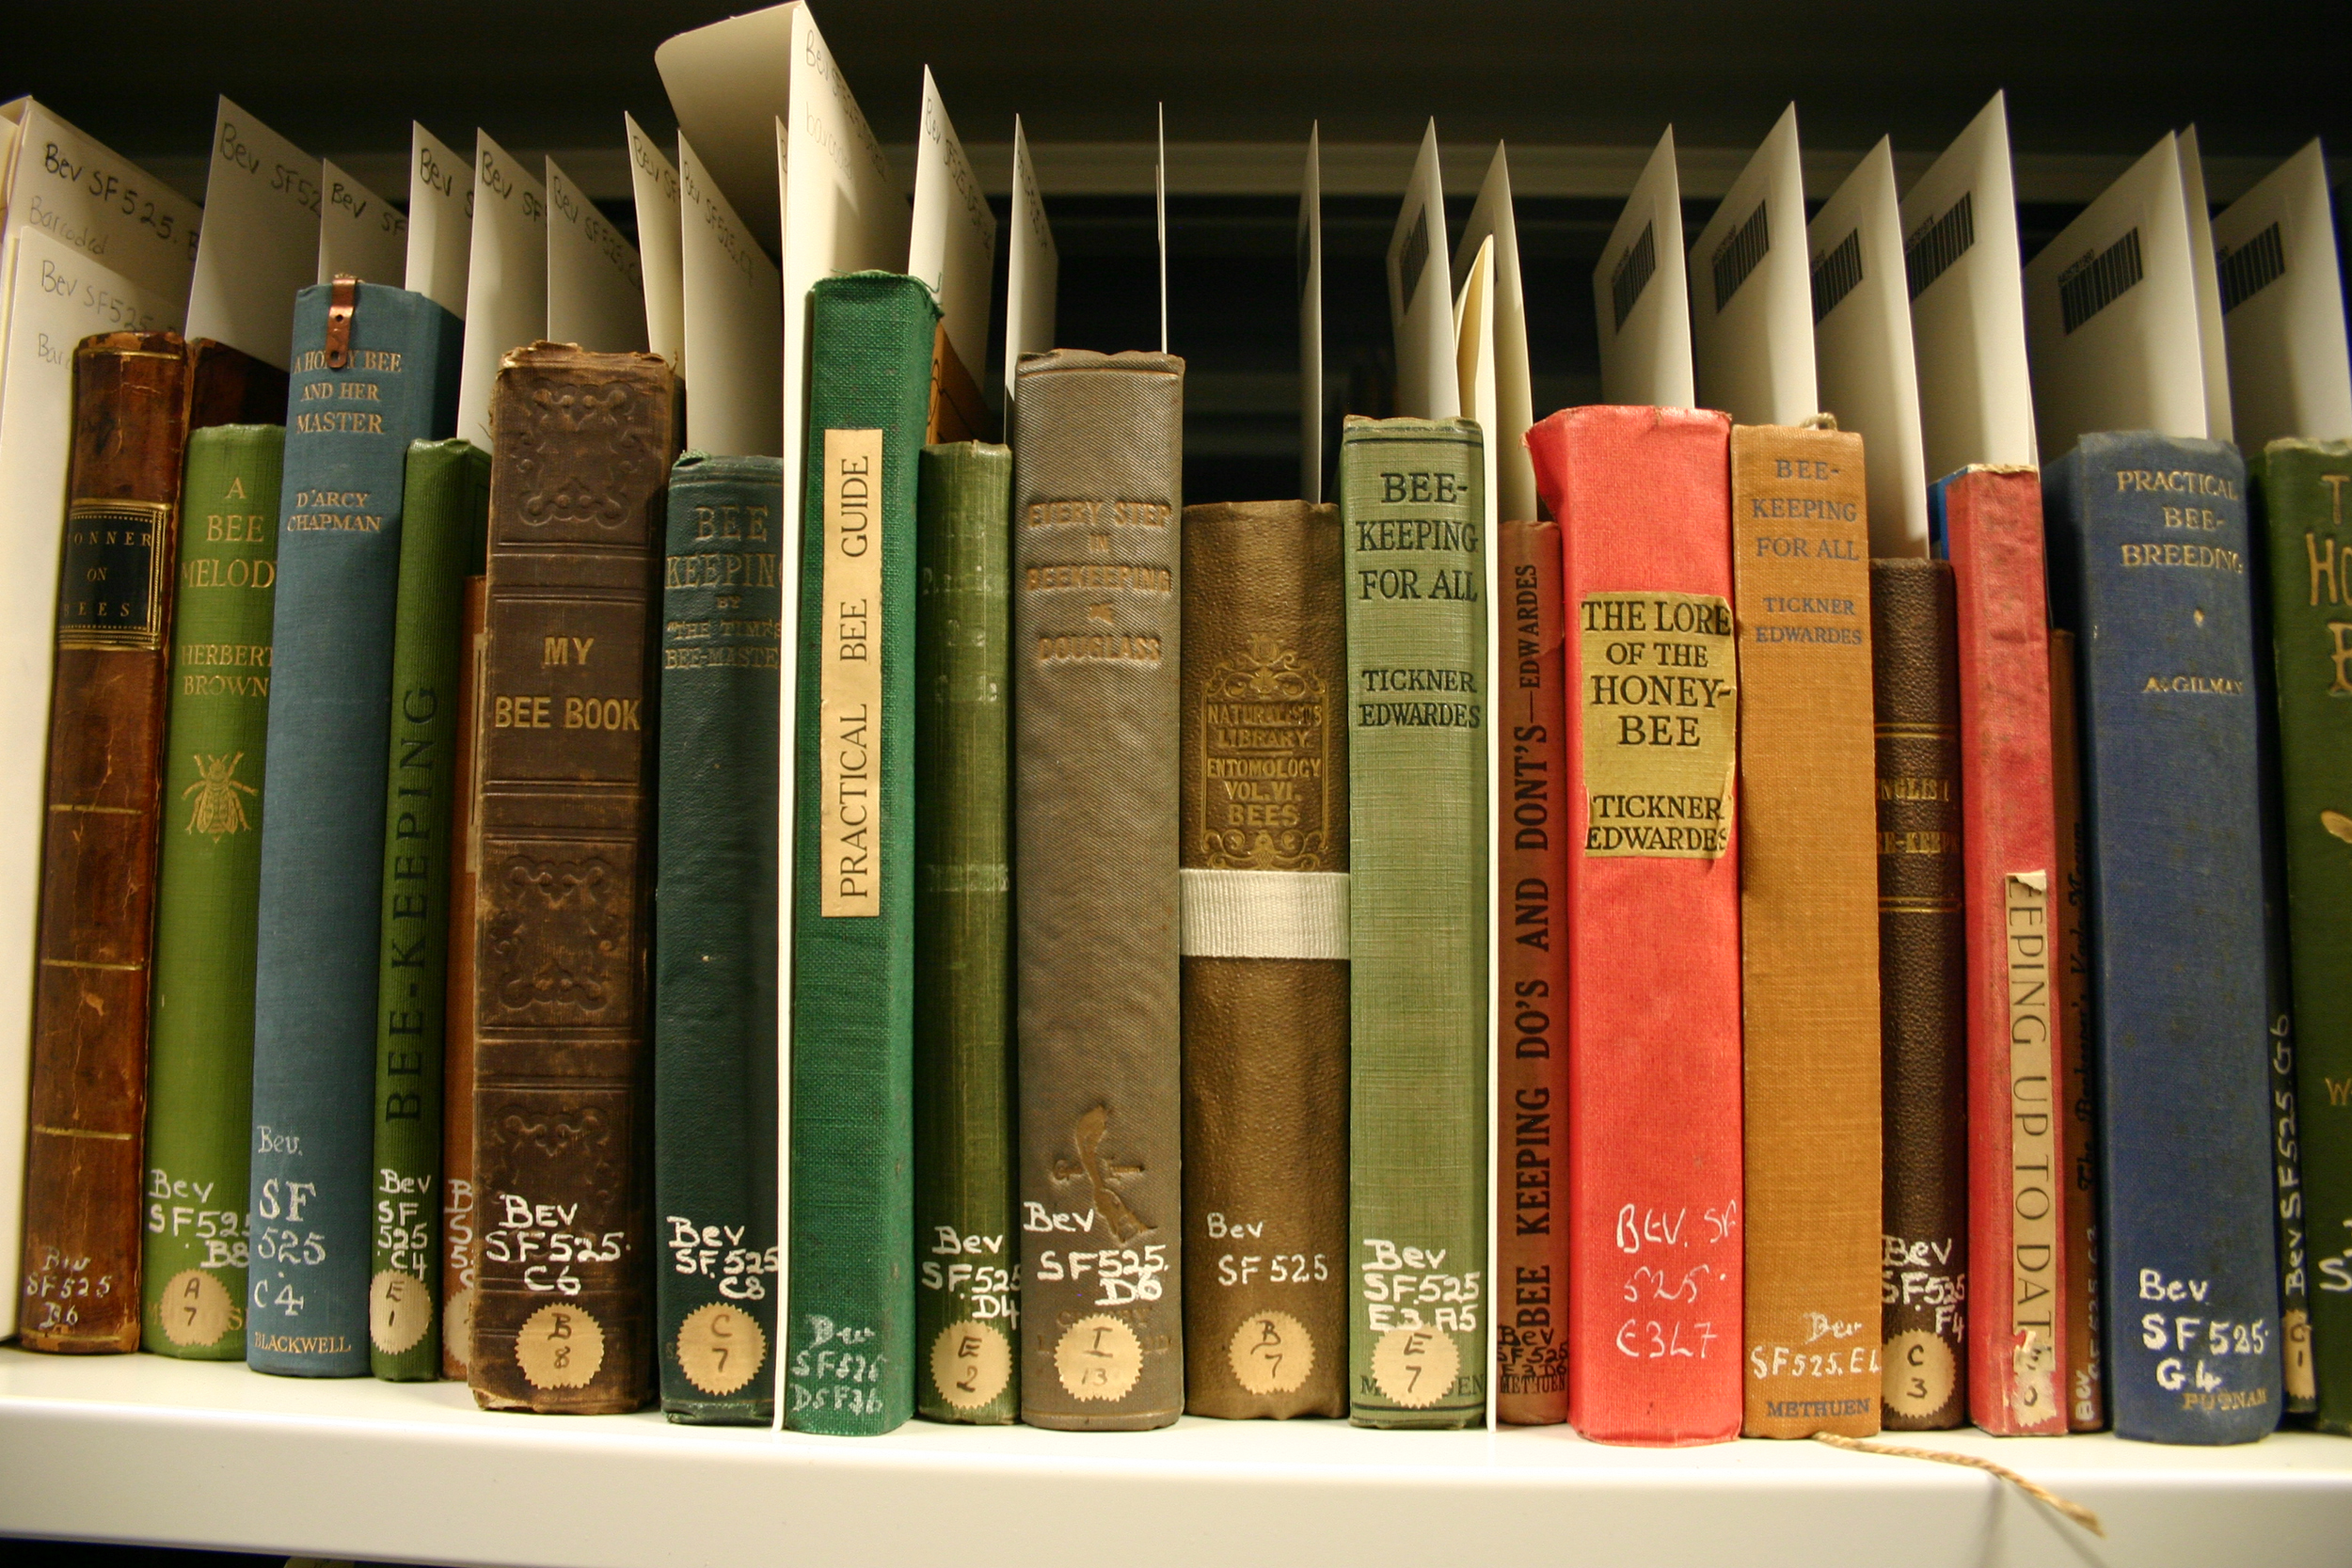 Just some of the books which Beveridge owned on beekeeping.